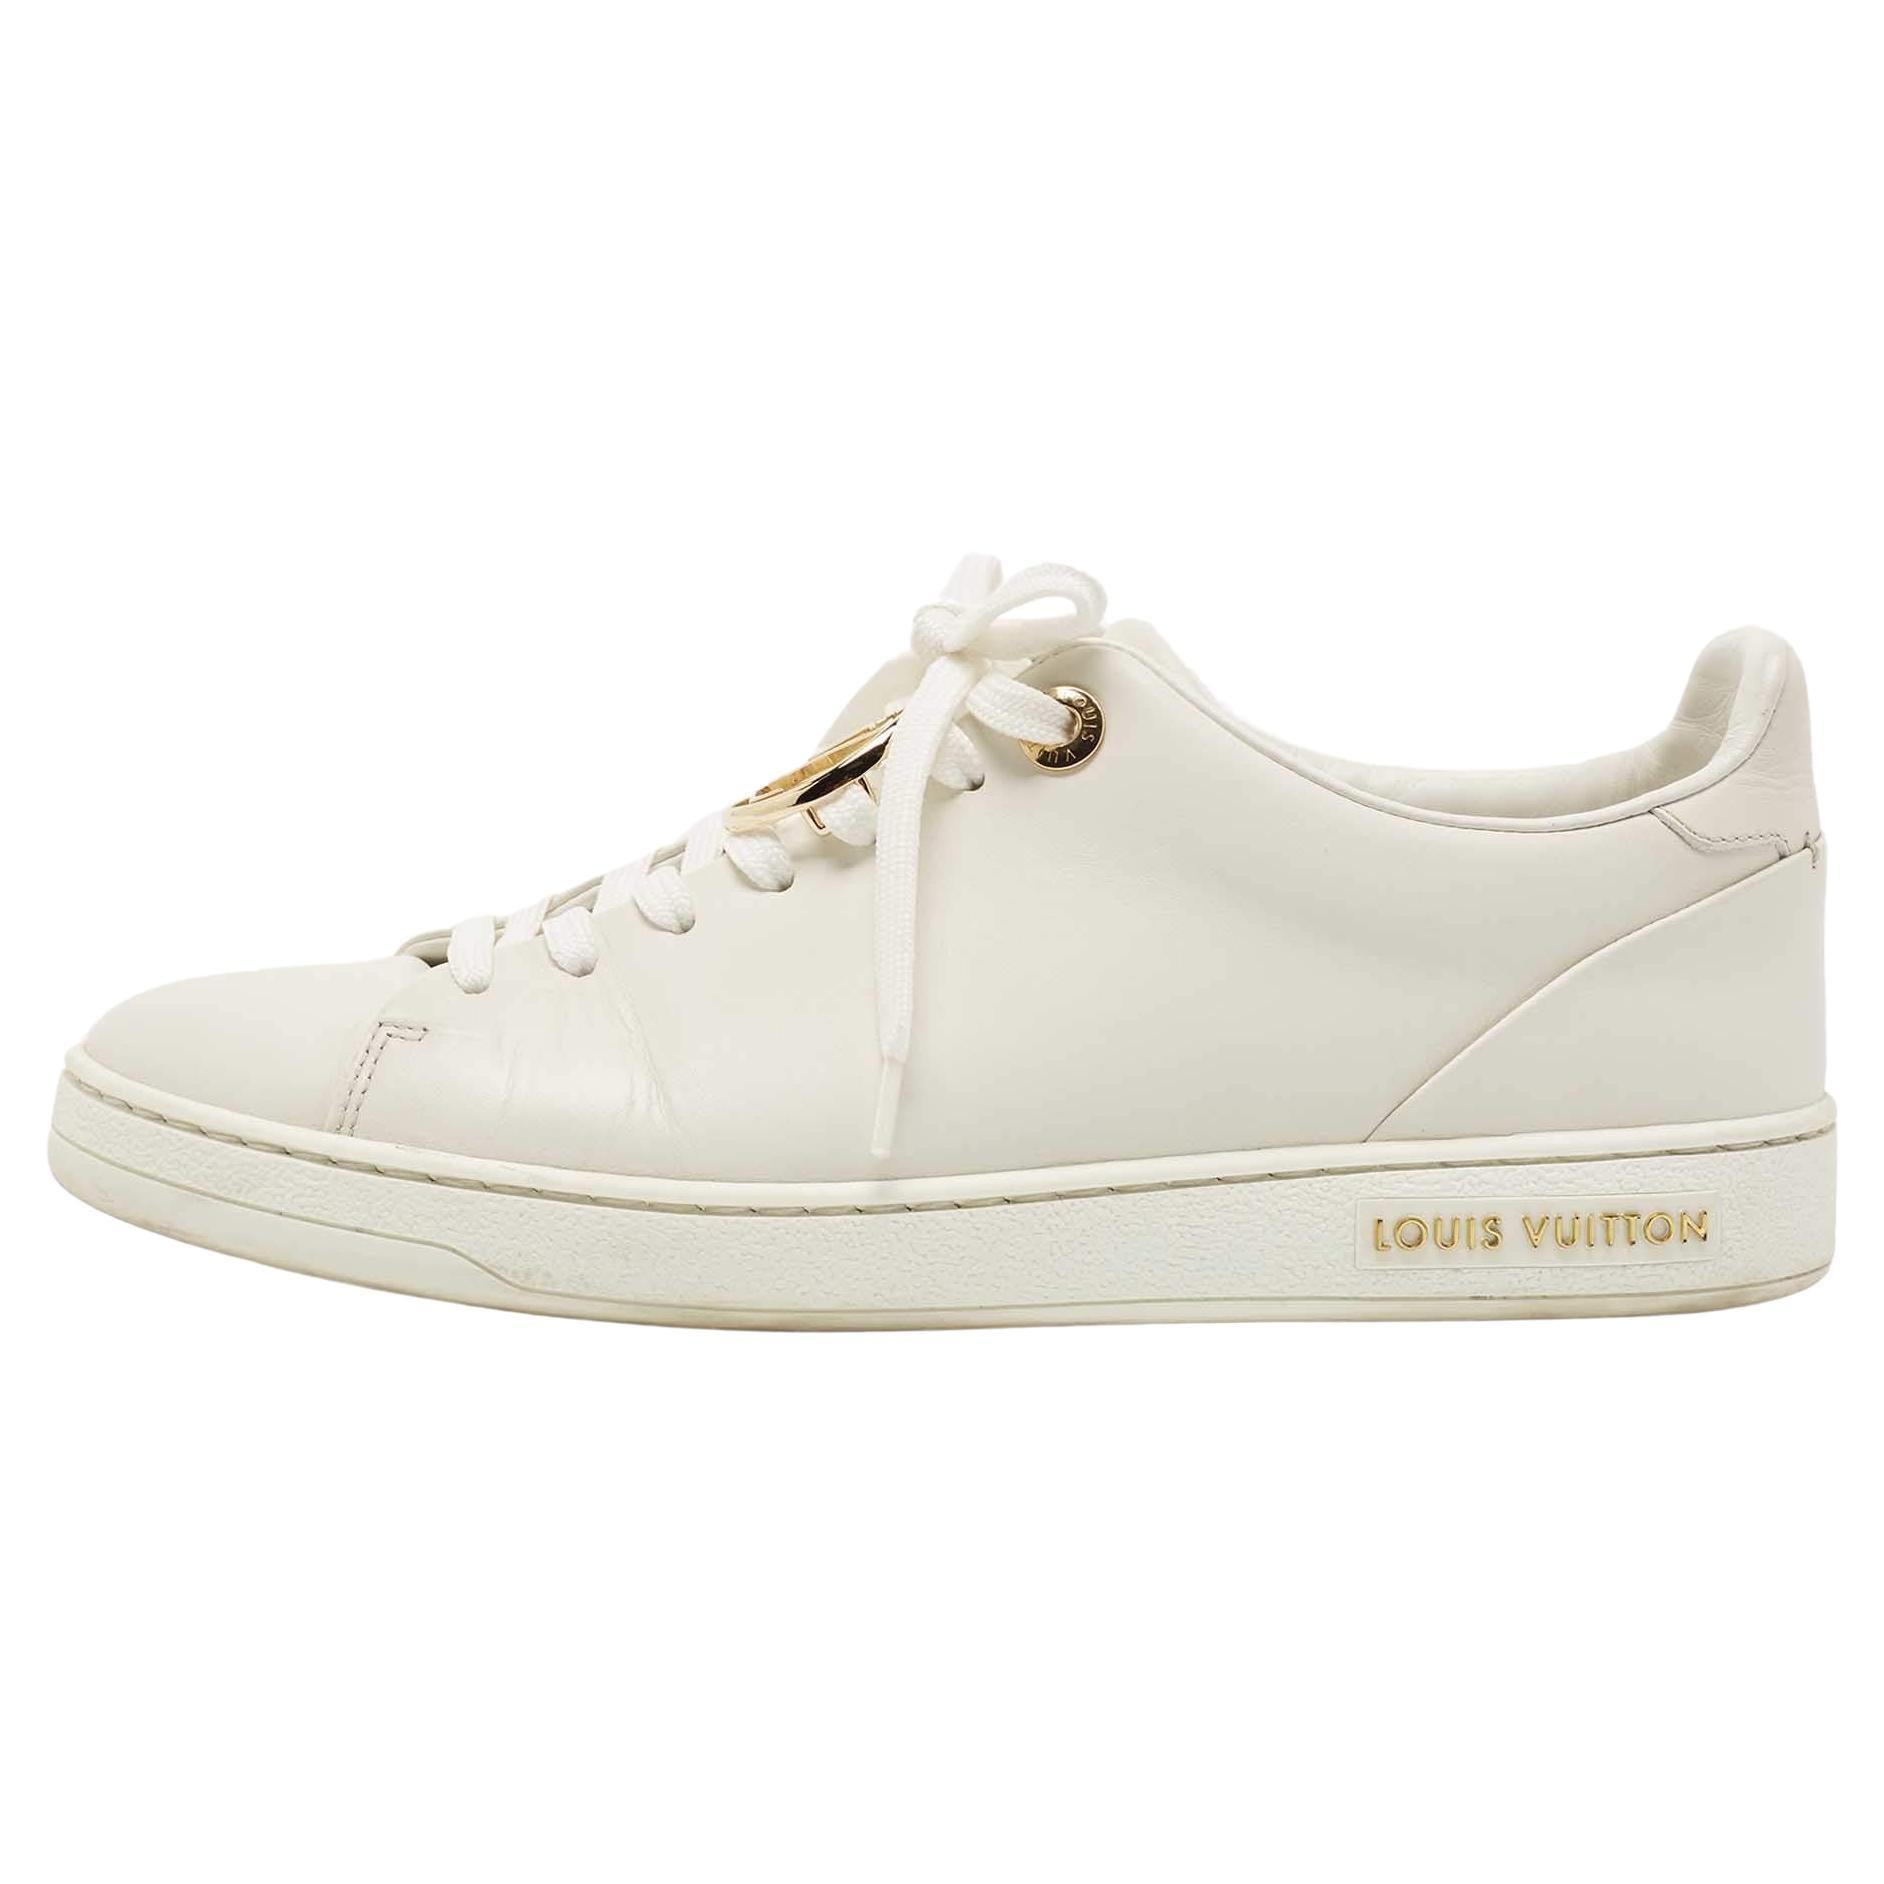 frontrow sneakers louis